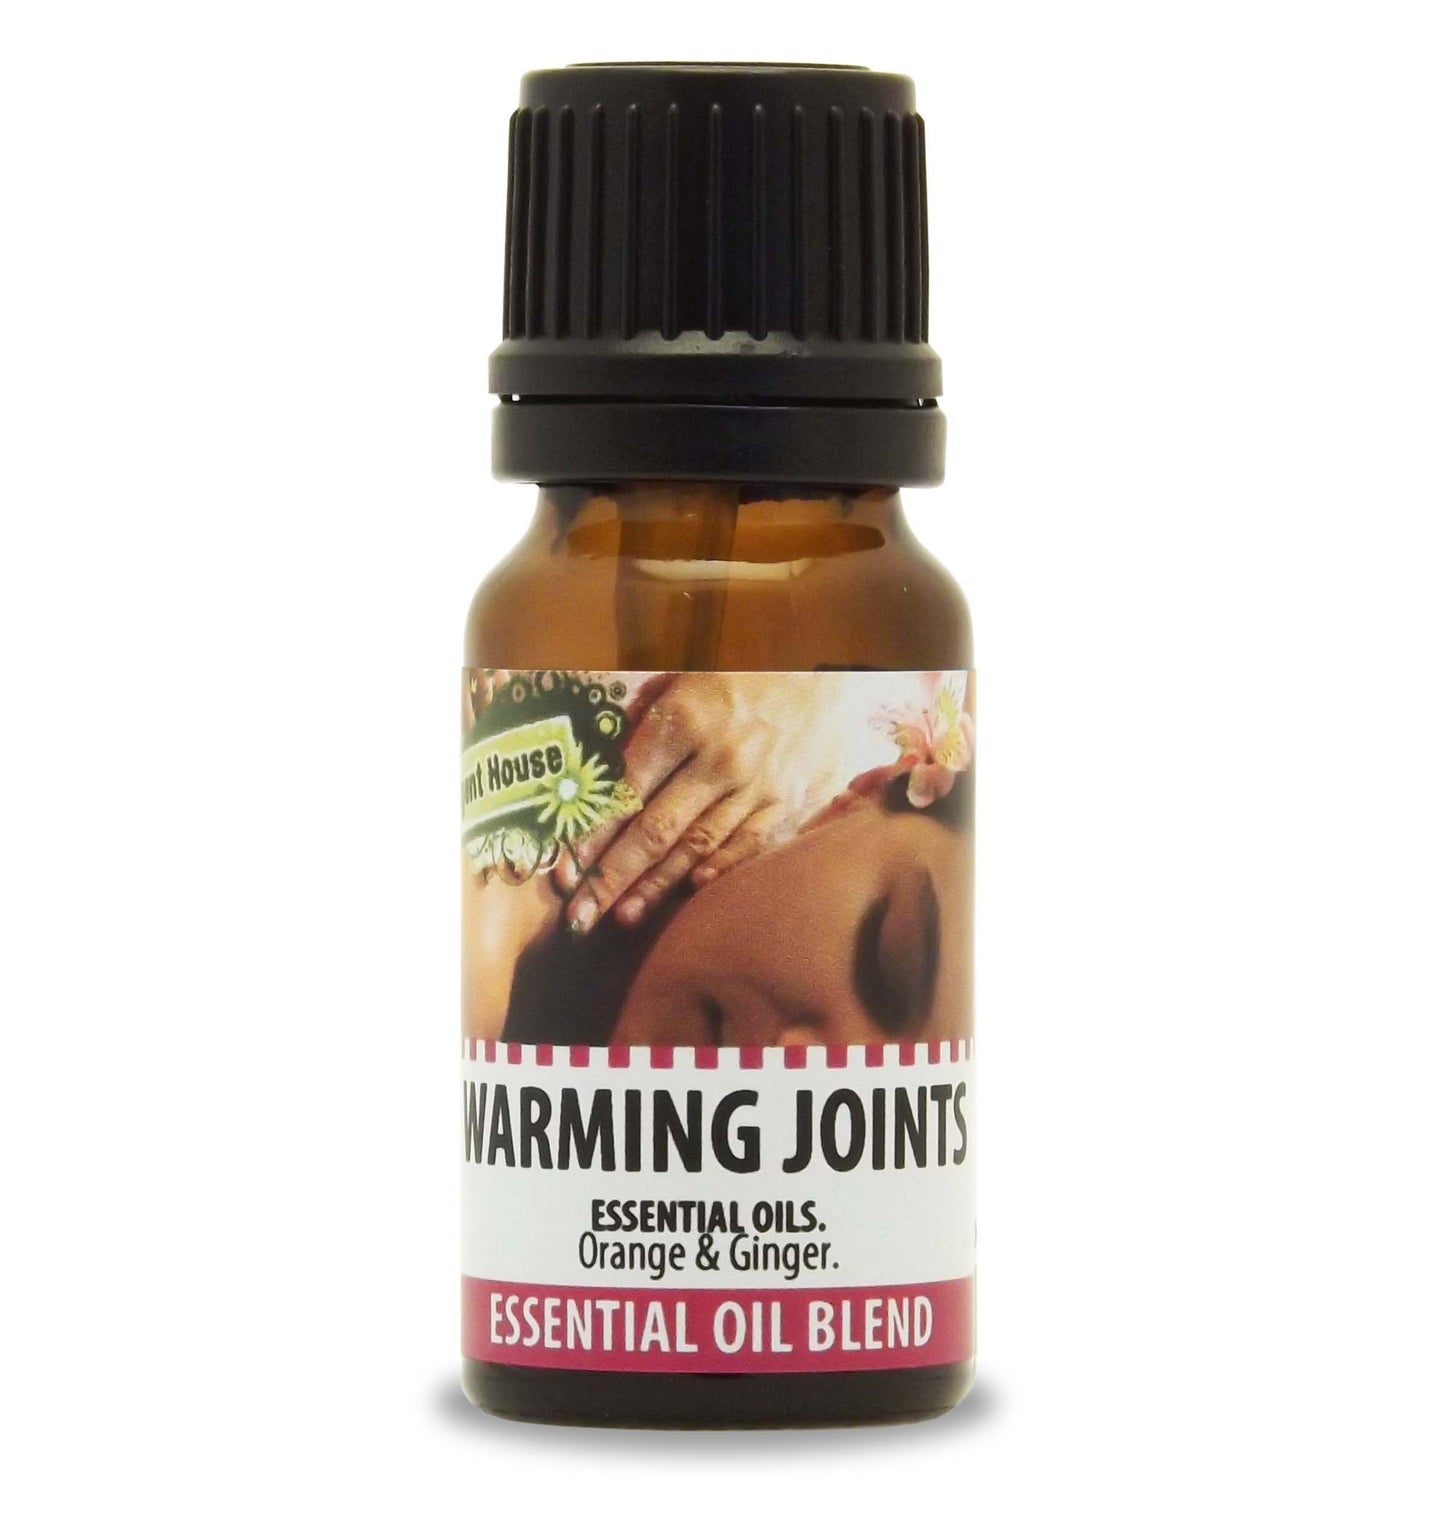 Warming Joints Essential Oil Blend